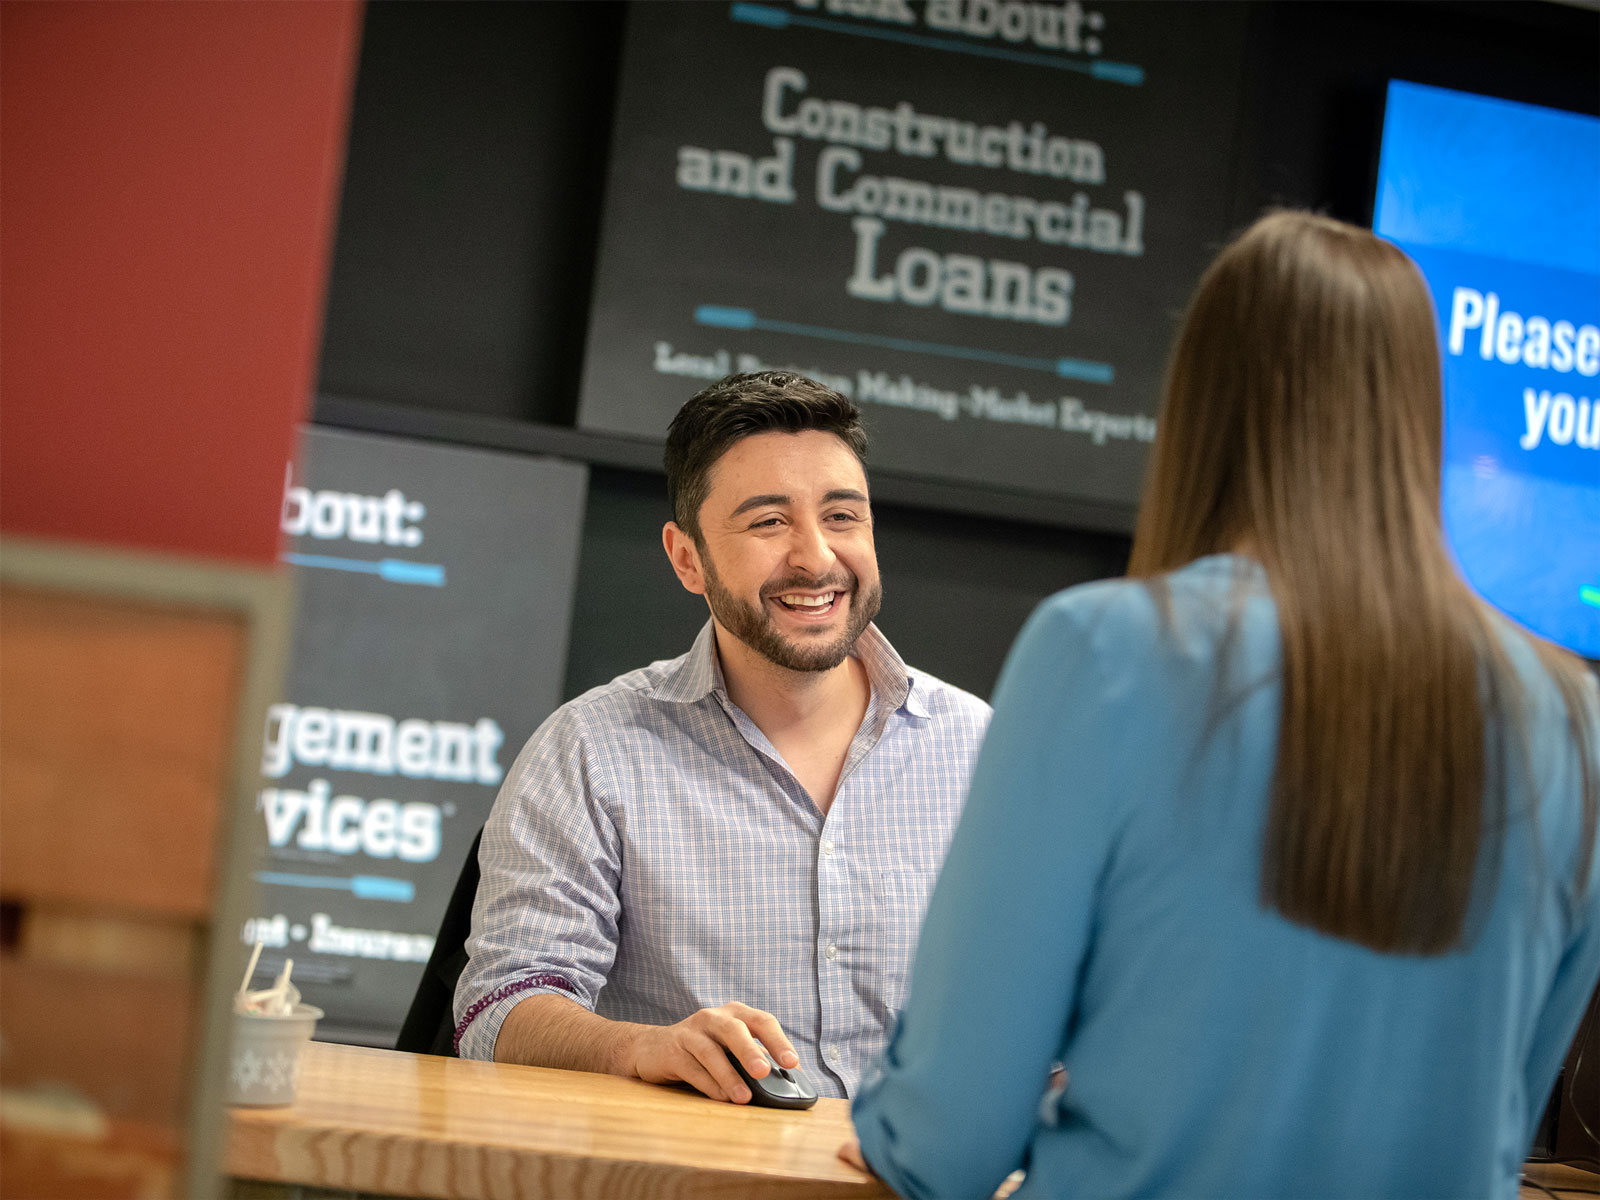 A male Elevations teller greets a customer at an Elevations branch 